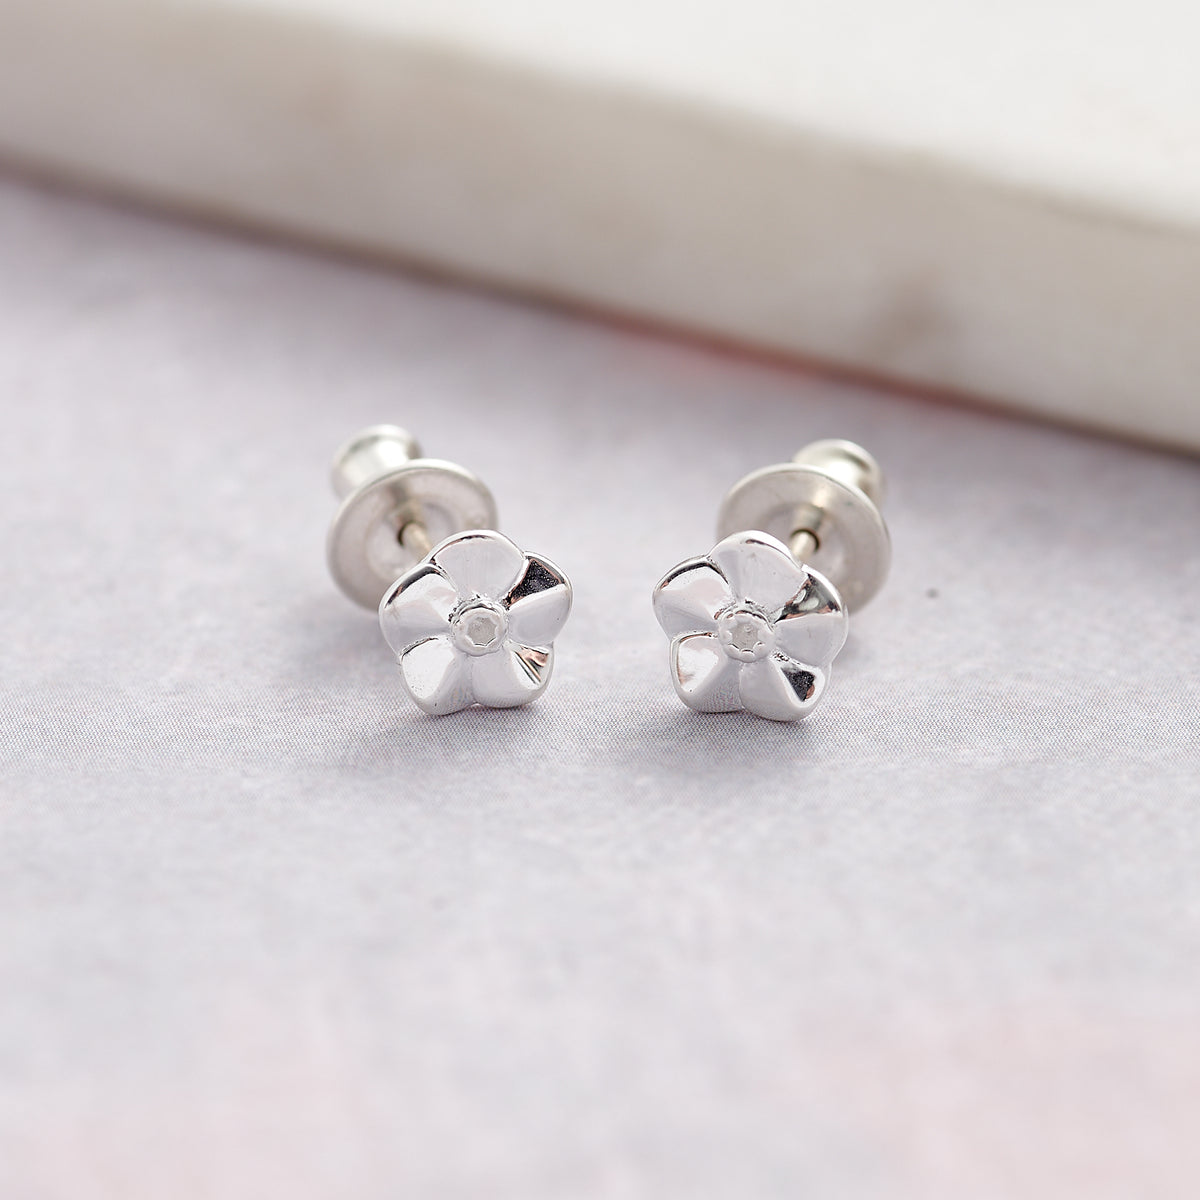 tiny silver forget me not flower stud earrings for women and girls scarlett jewellery brighton